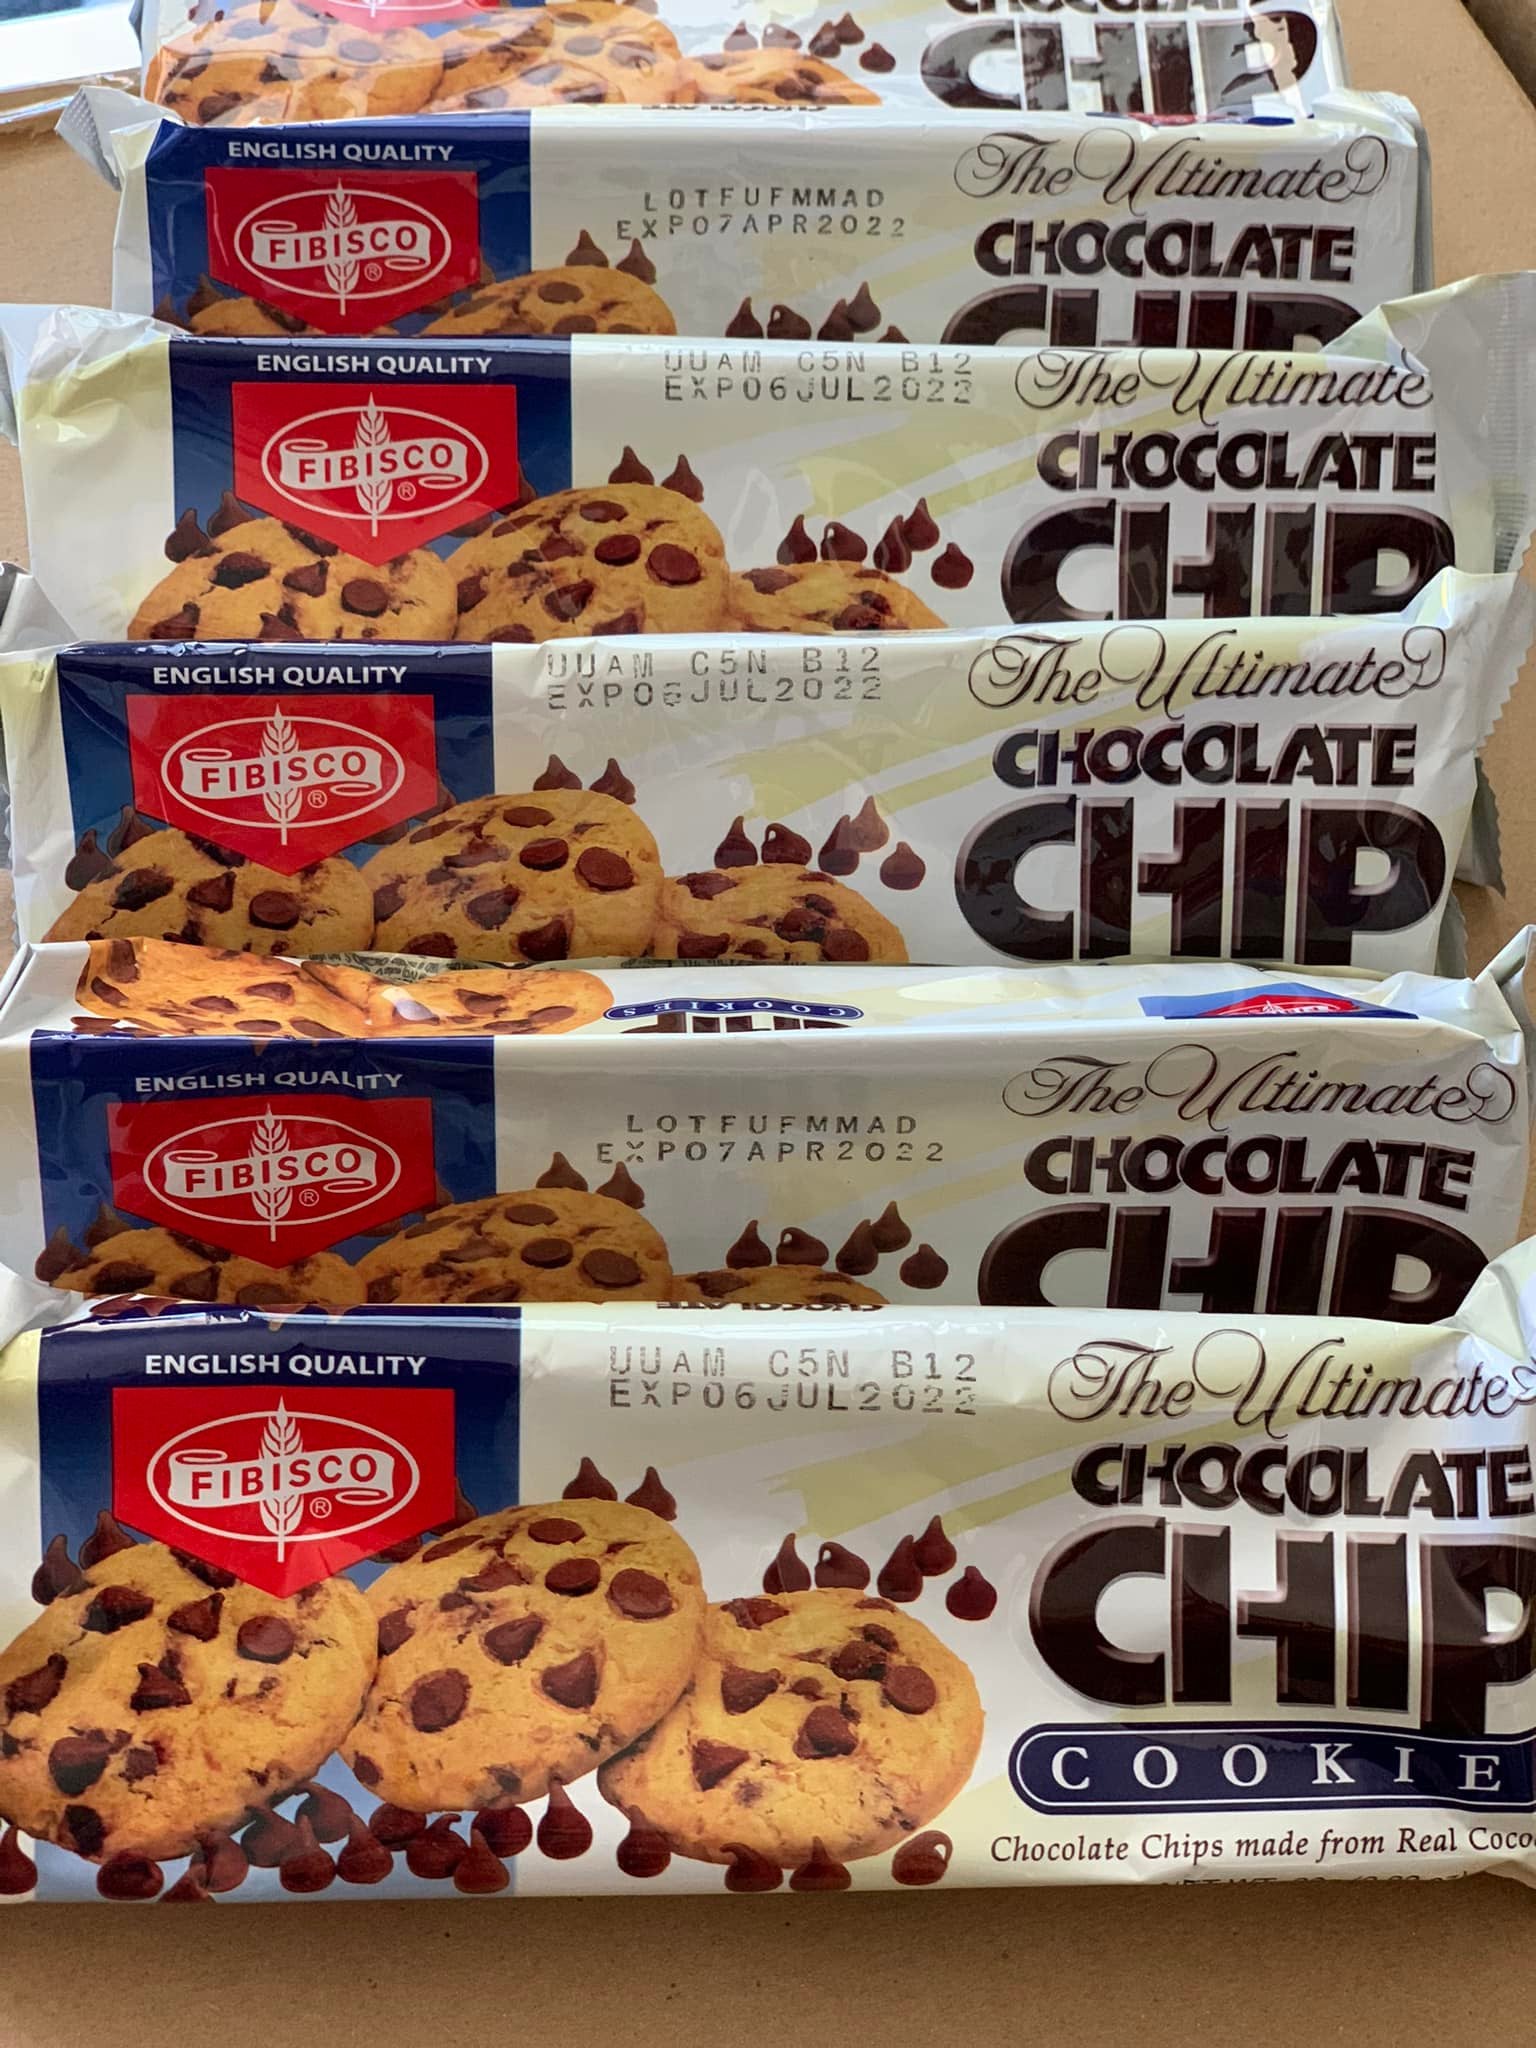 The Ultimate Chocolate Chip